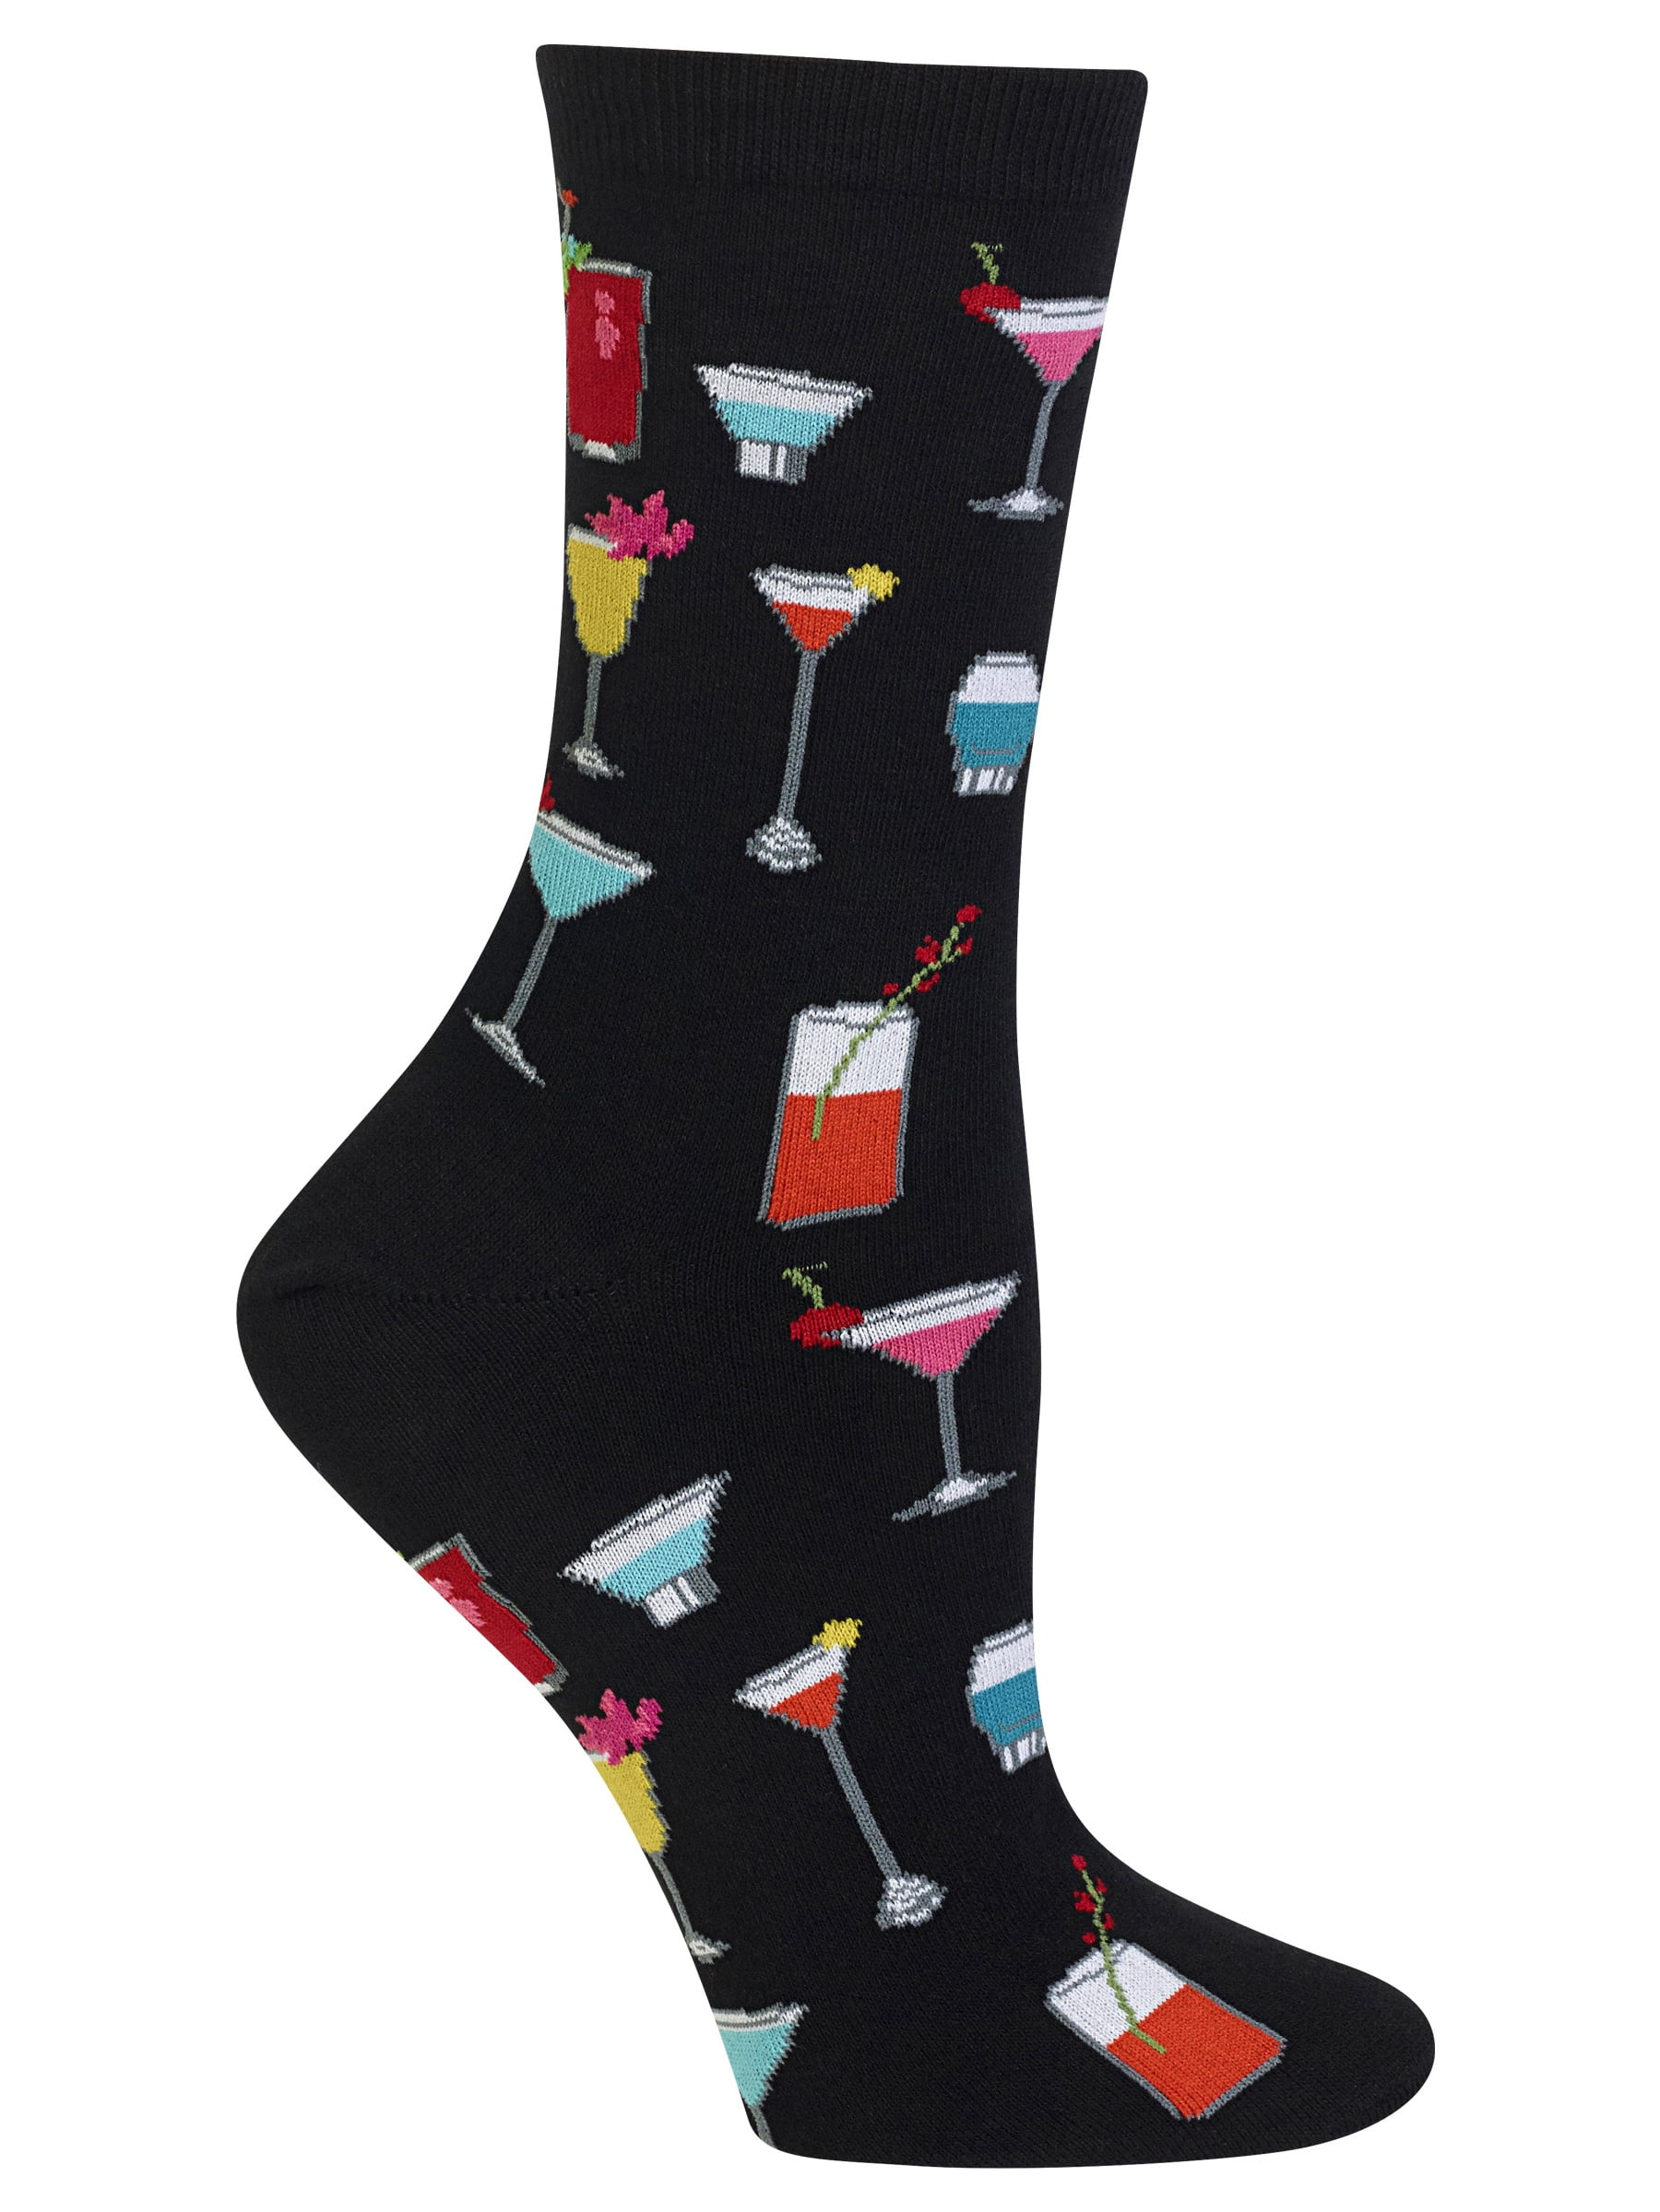 Hot Sox - Tropical Drinks Novelty Socks for Women by Hot Sox - Fun ...